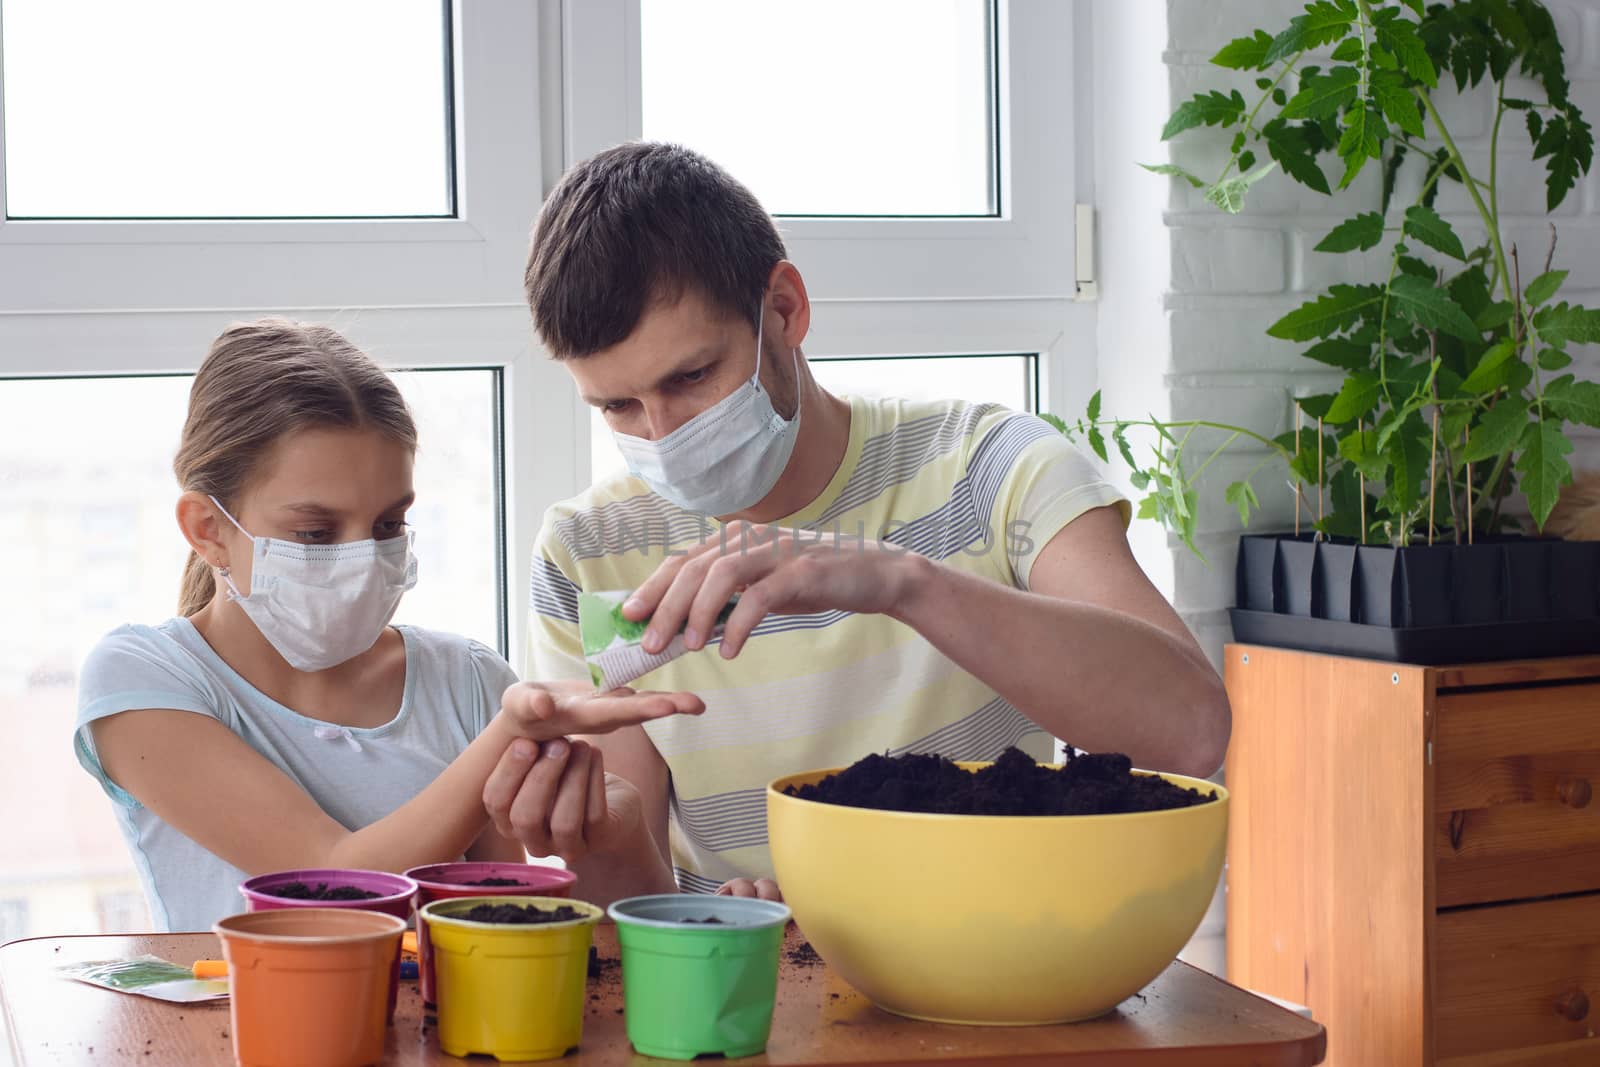 Dad and daughter in quarantine at home, planting plants in pots